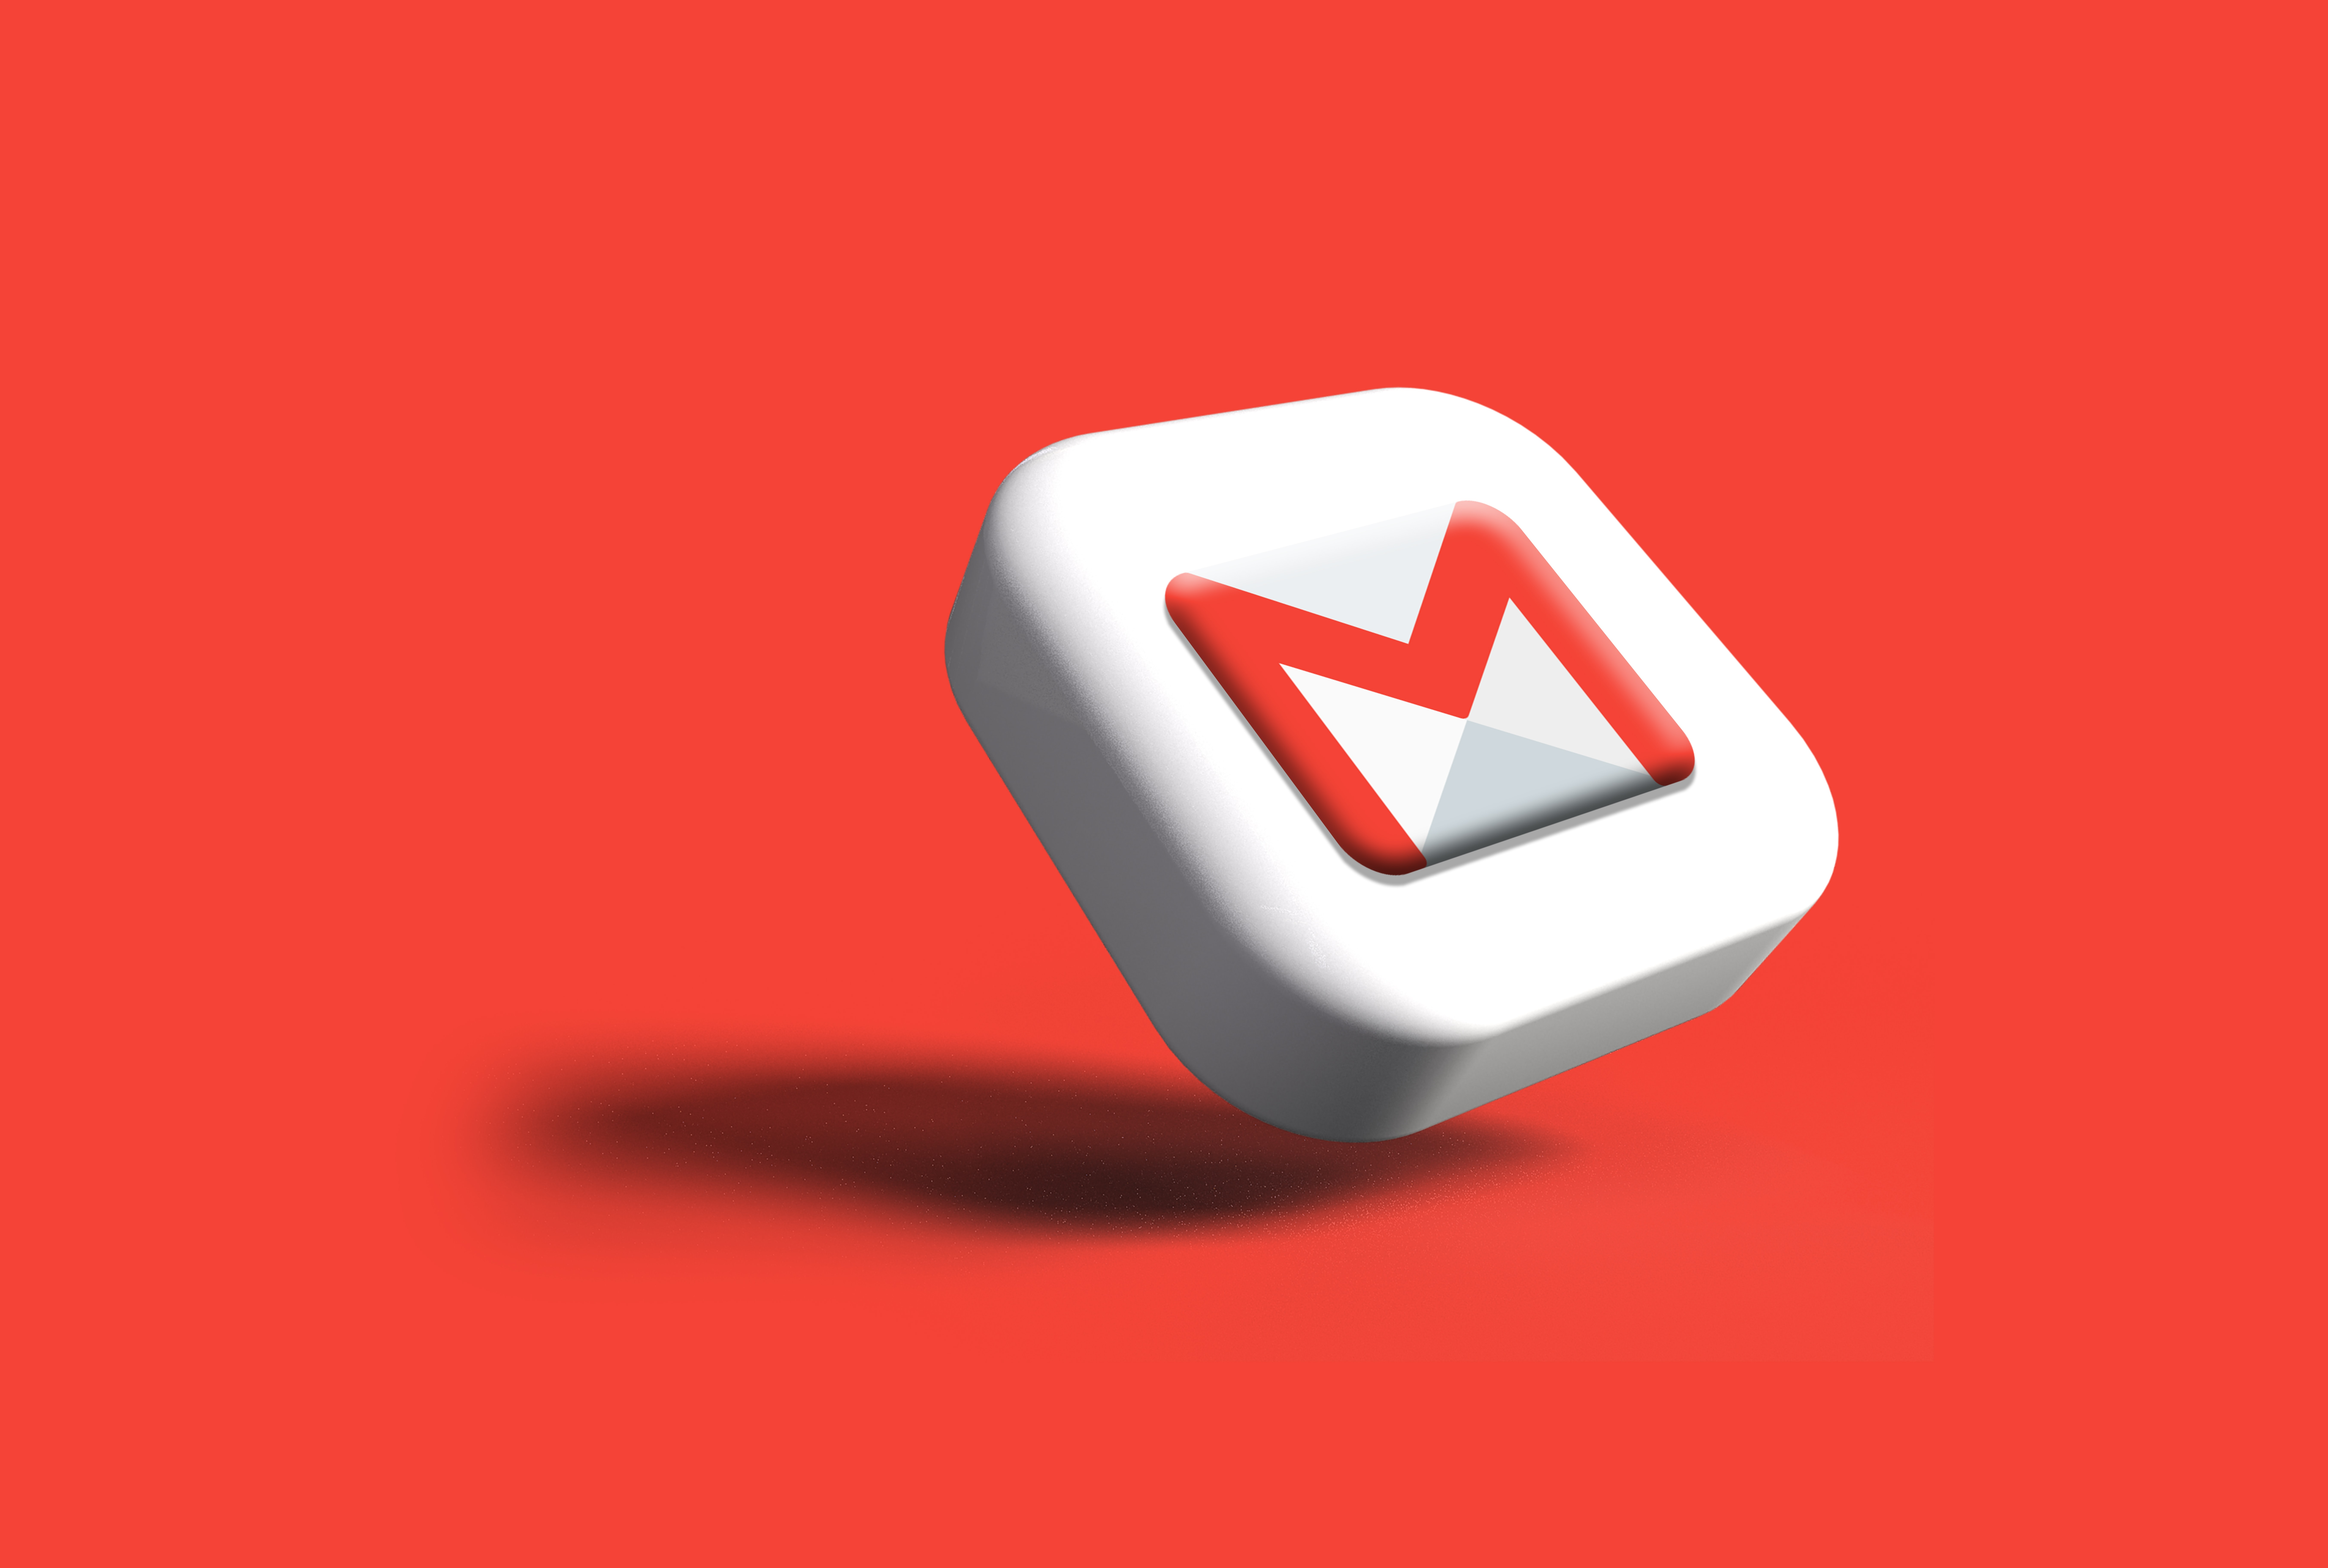 Gmail Tutorials: Opening a Gmail Account